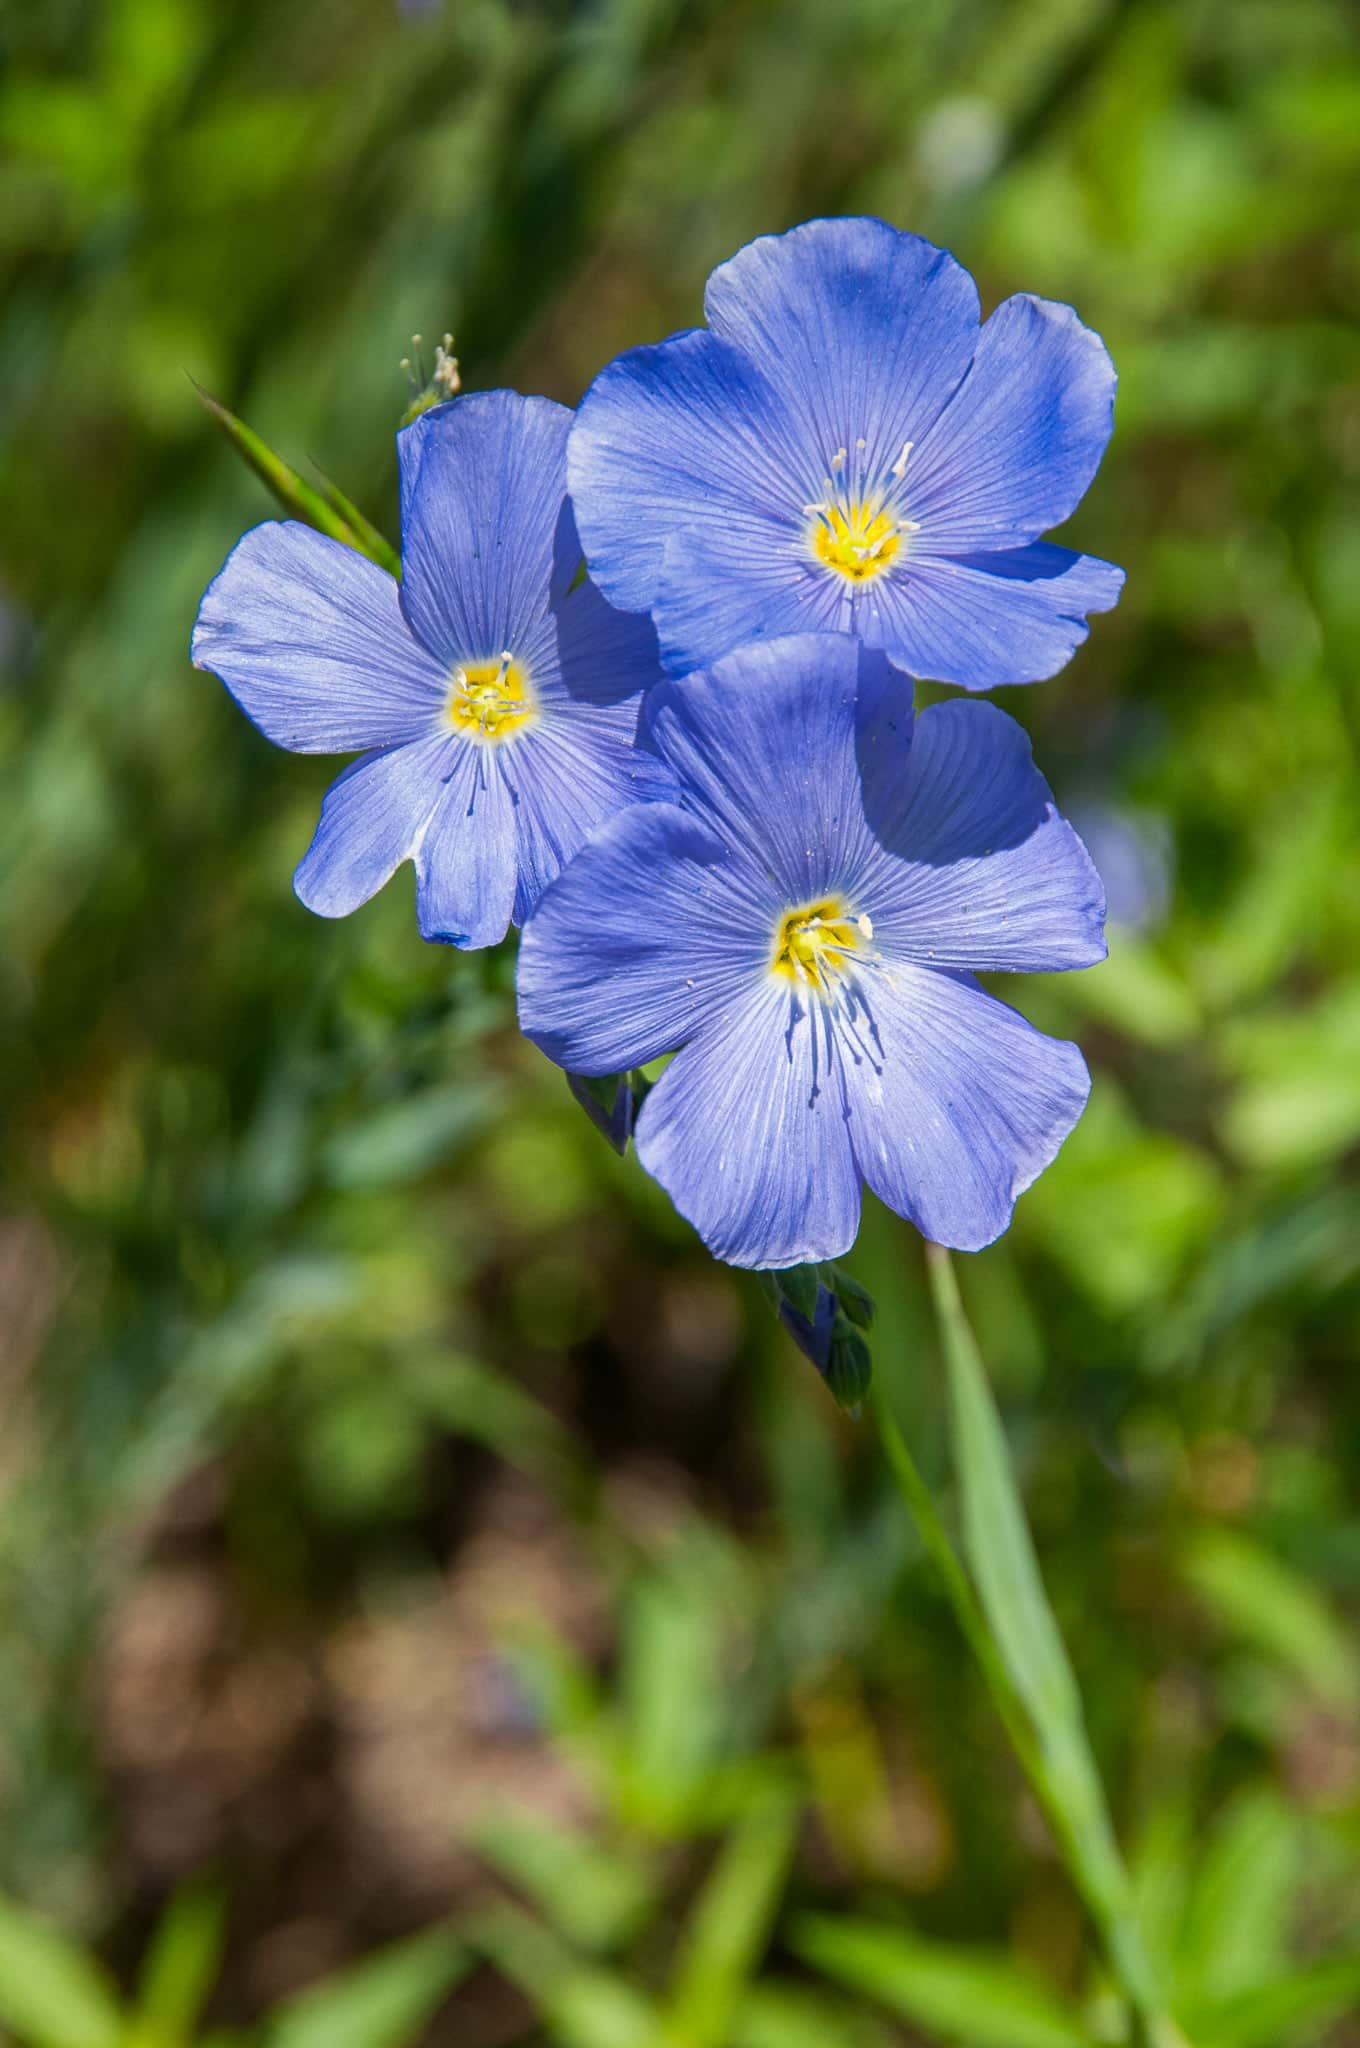 A lovely example of Wild Blue Flax growing along the Washington Gulch Road near Mt. Crested Butte, Colorado.